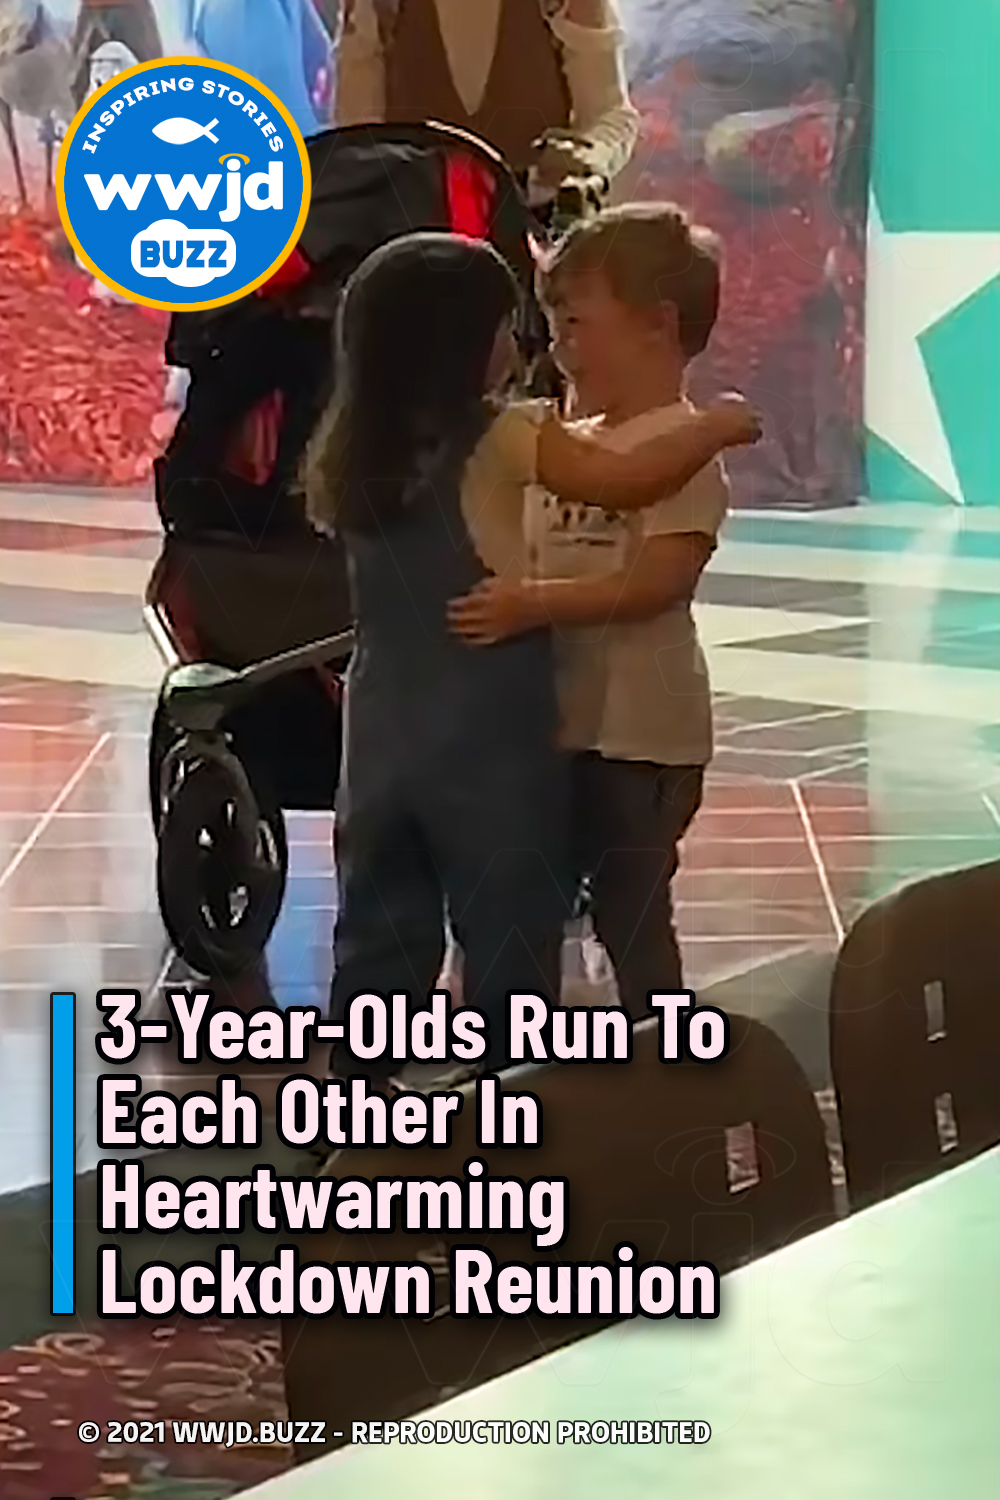 3-Year-Olds Run To Each Other In Heartwarming Lockdown Reunion